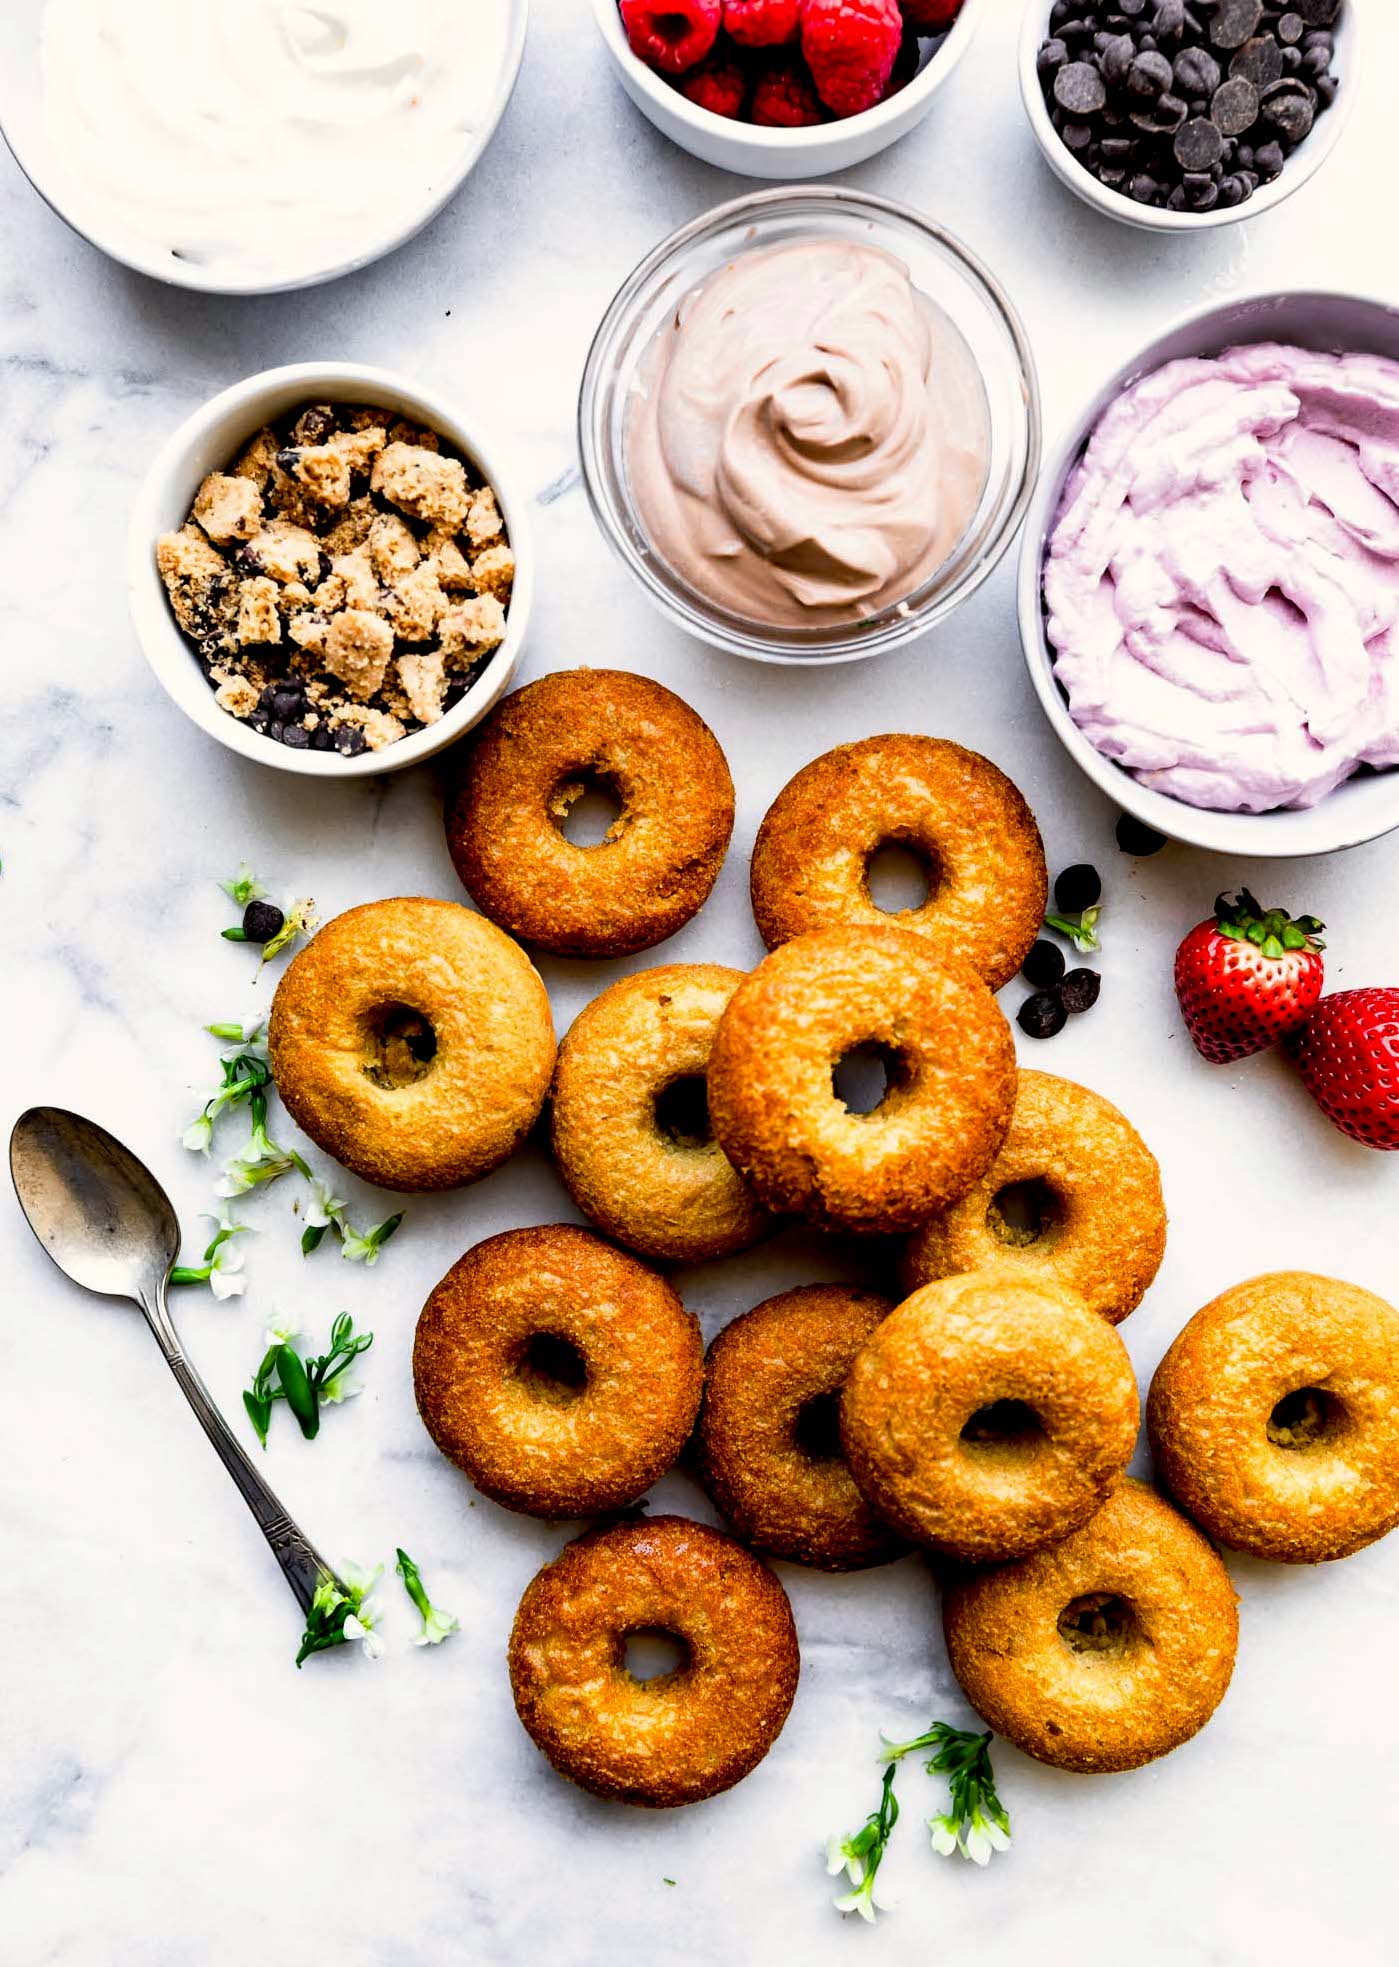 unglazed baked vegan donuts with bowls of frosting including a chocolate flavor, a berry flavor, and a vanilla flavor with bowls of cookie pieces, chocolate chips, and raspberries